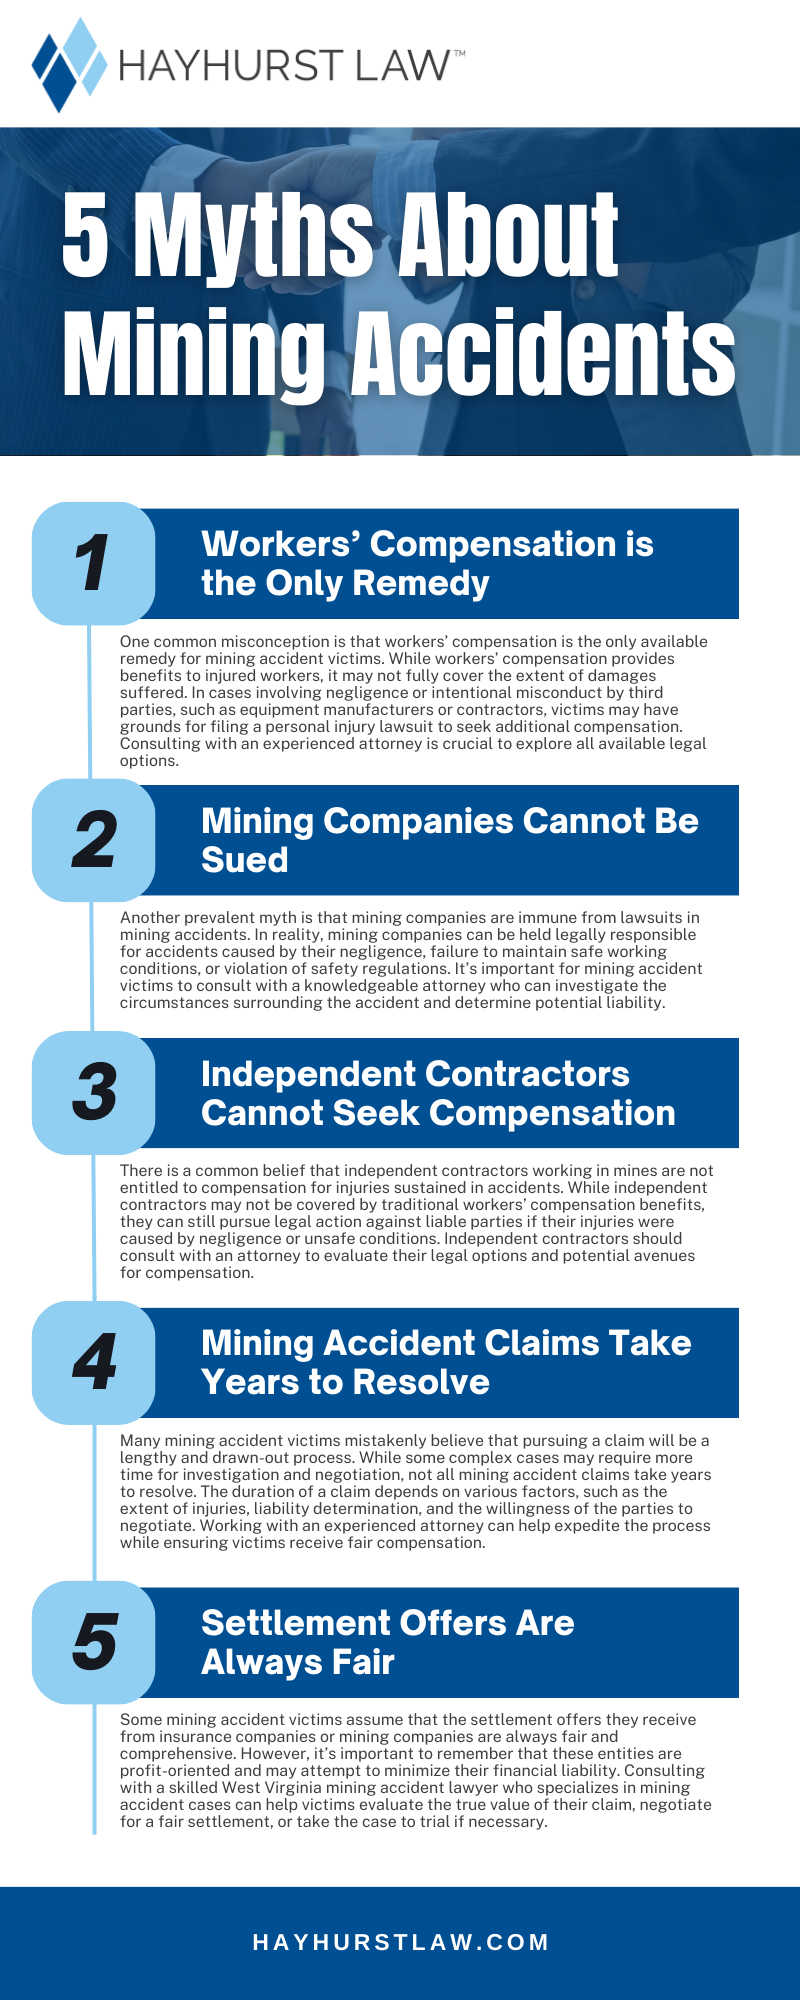 5 Myths About Mining Accidents Infographic